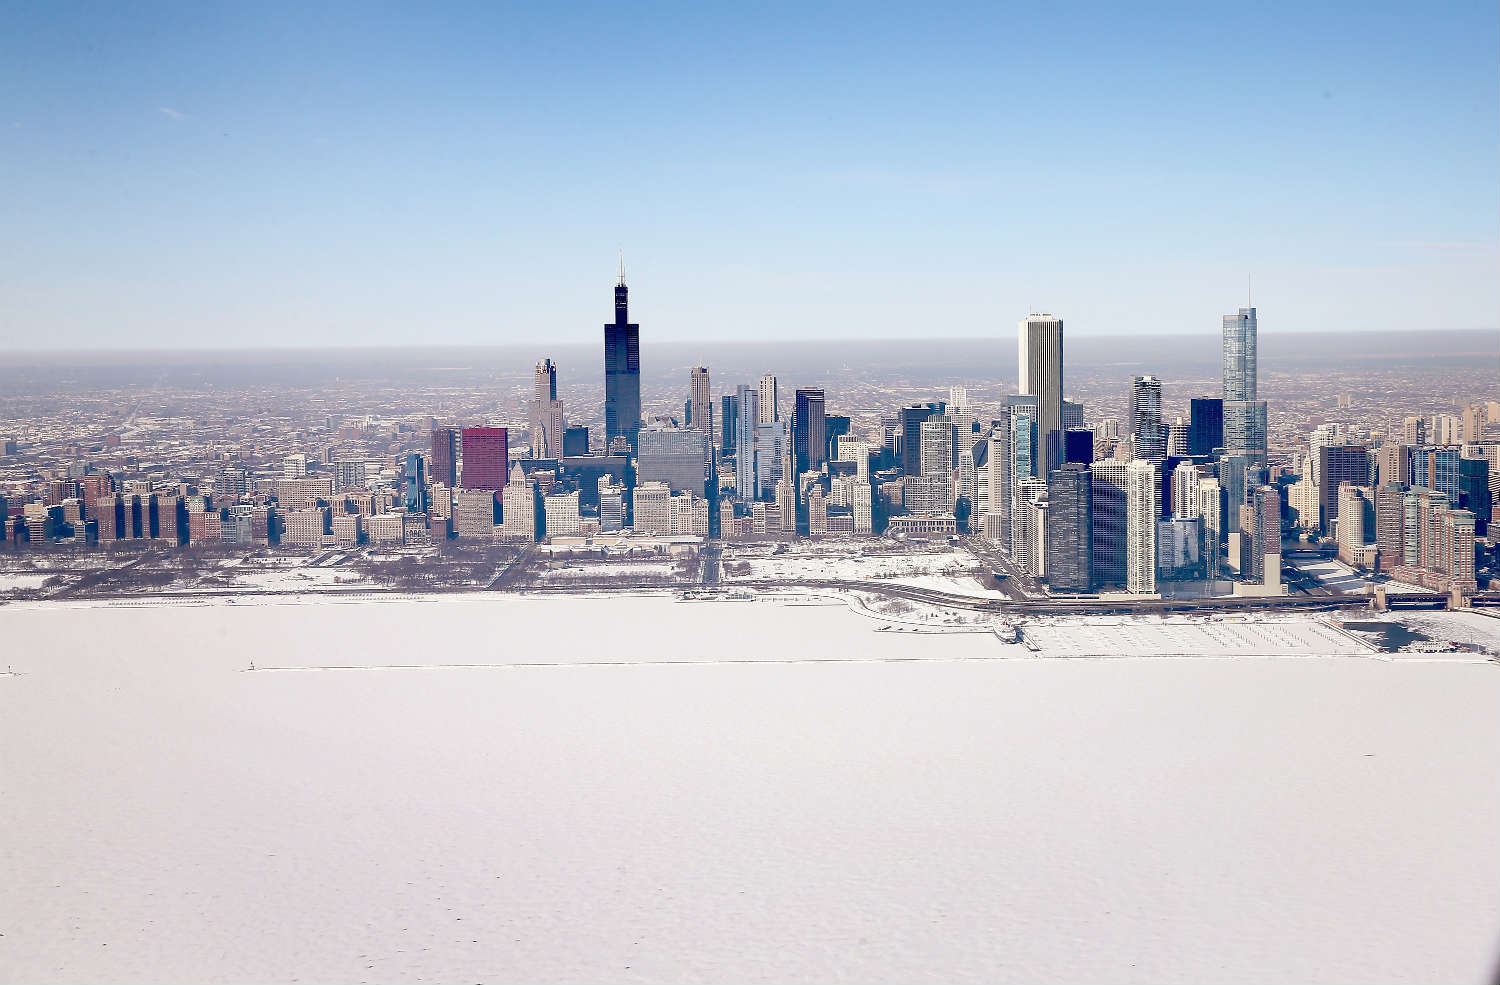 The winter was brutal in Midwestern cities like Chicago (Scott Olson/Getty Images)